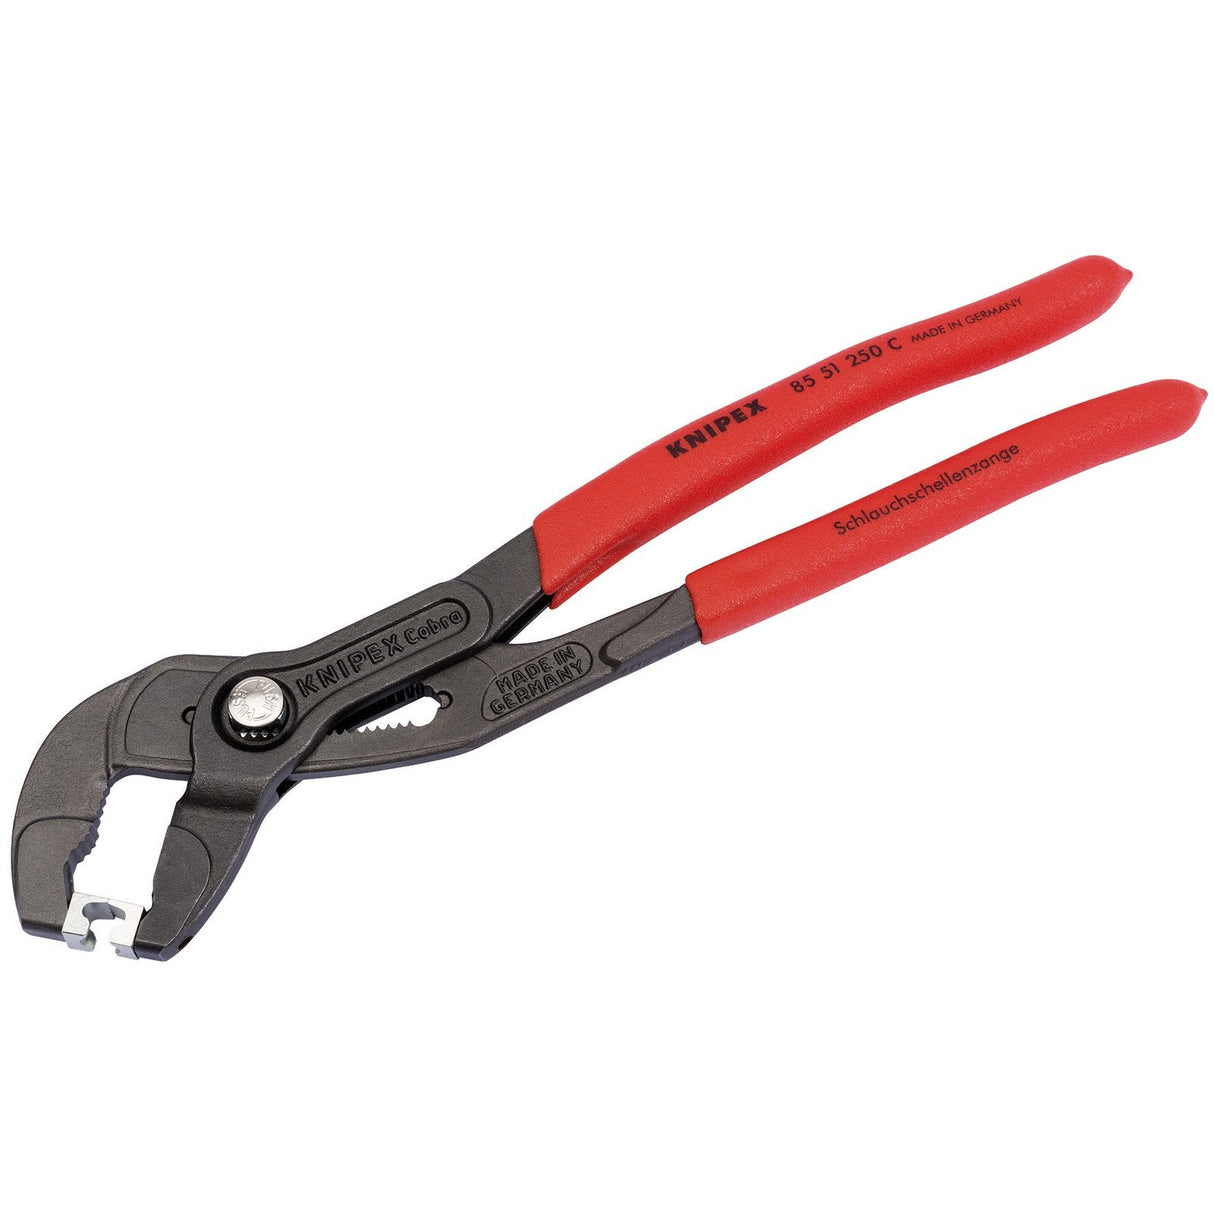 Draper Knipex 85 51 250C Hose Clamp Pliers For Clic And Clic R Hose Clamps, 250mm - 85 51 250 C - Farming Parts